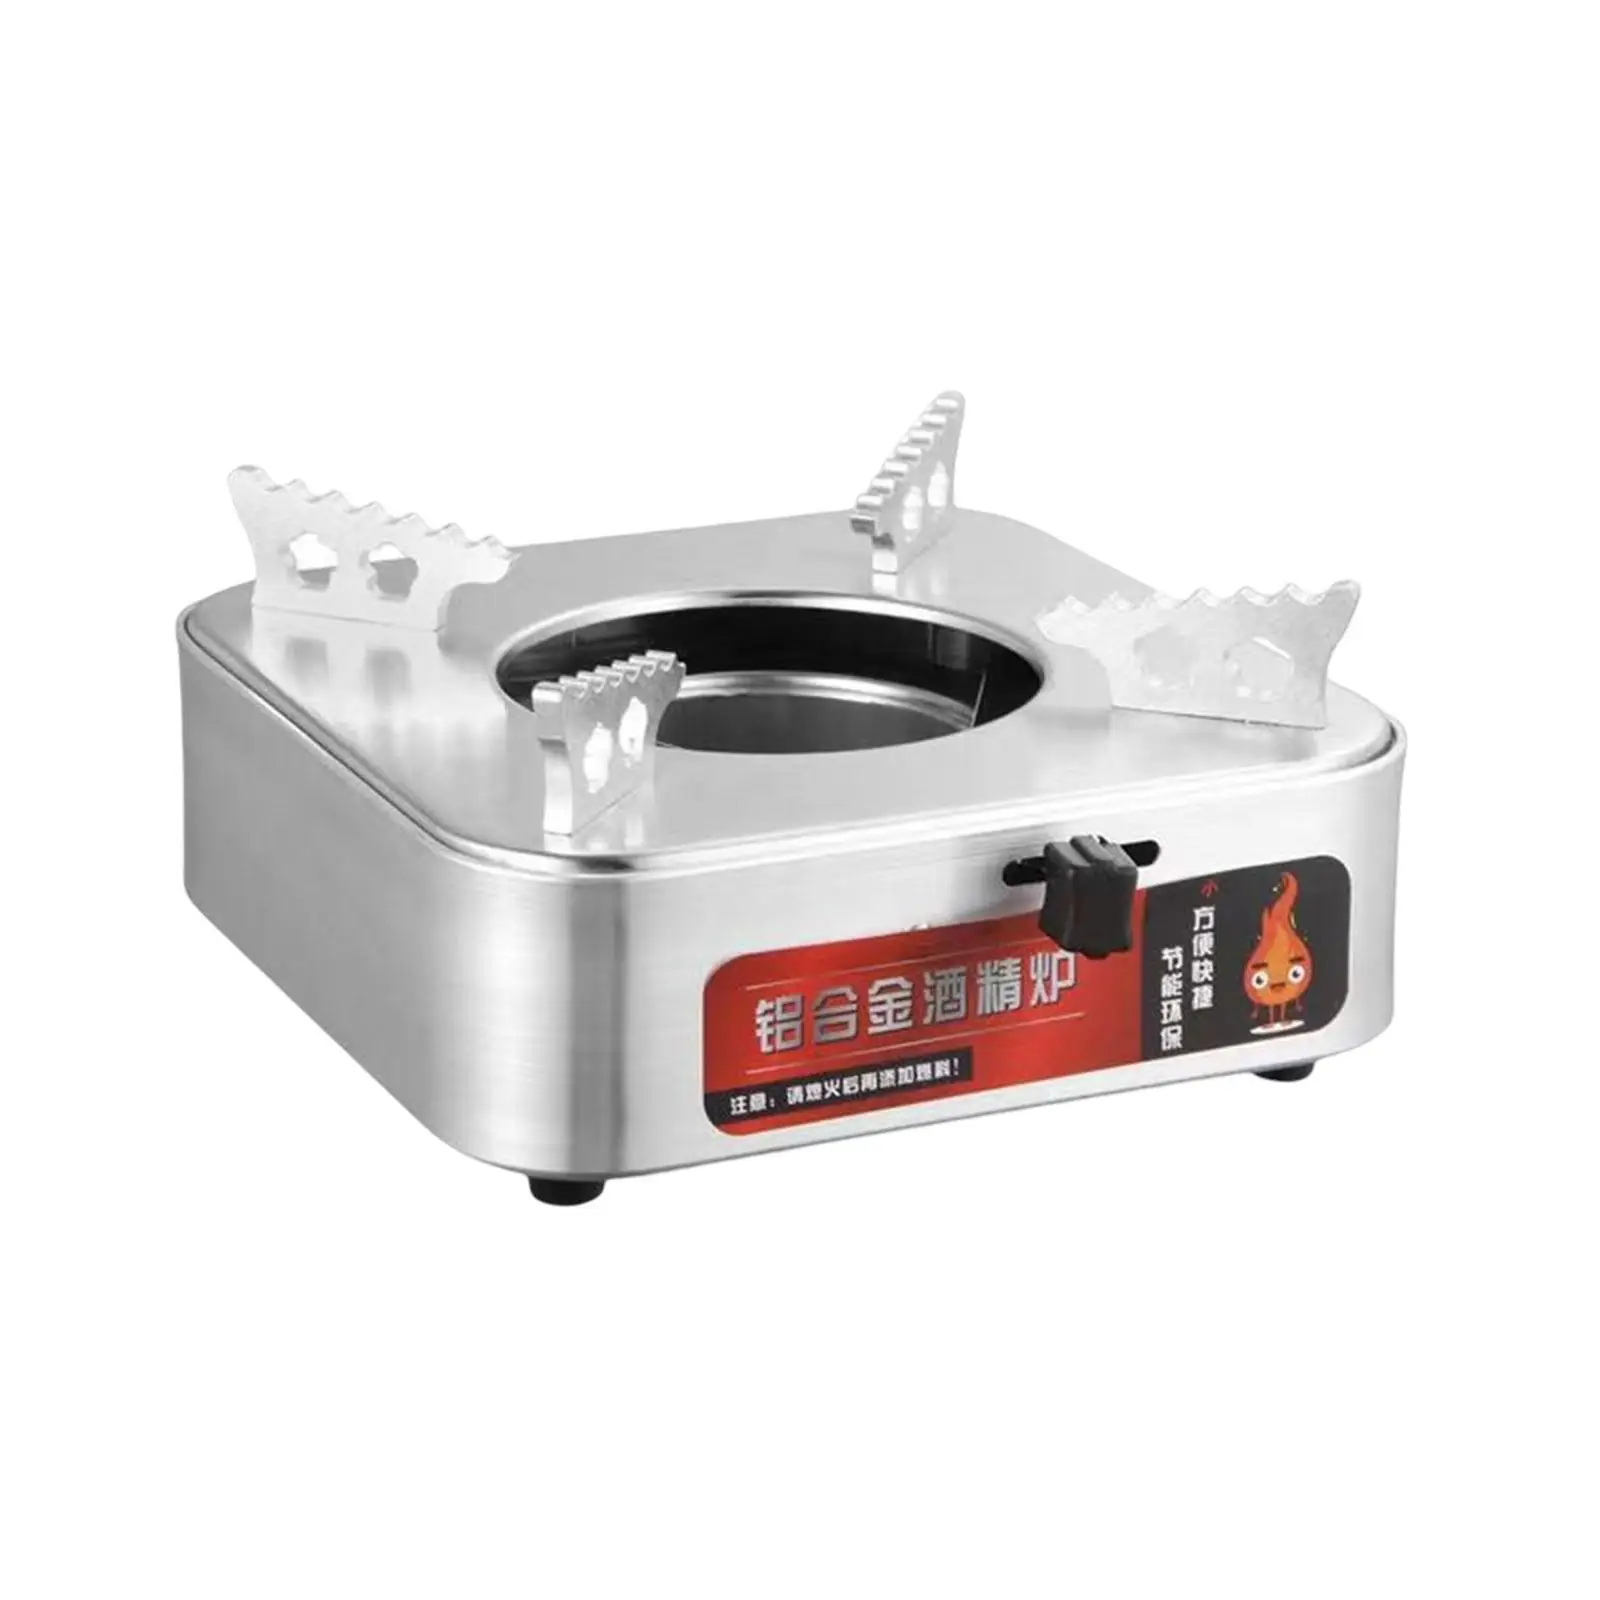  Stove Kitchen Equipment Camping Stove for Picnic Restaurant Cooking